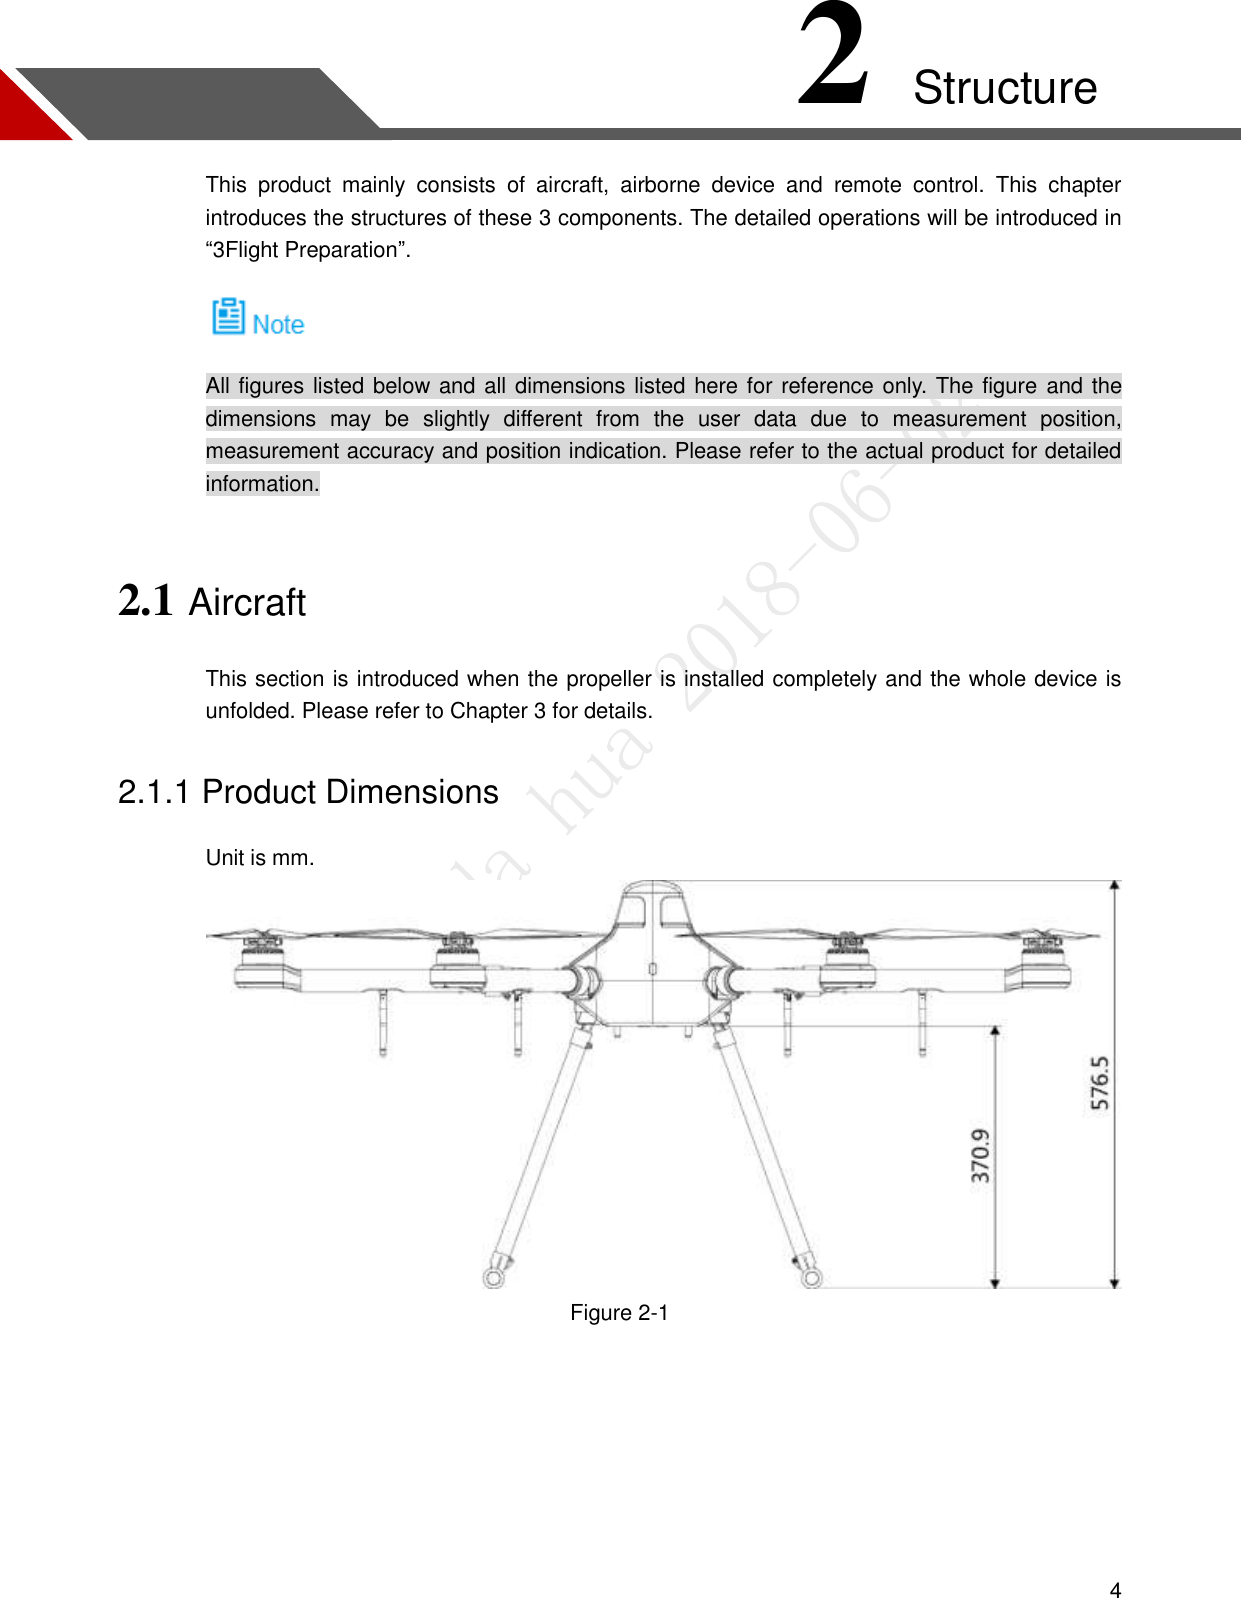  4 2 Structure This  product  mainly  consists  of  aircraft,  airborne  device  and  remote  control.  This  chapter introduces the structures of these 3 components. The detailed operations will be introduced in “3Flight Preparation”.  All figures listed below and all dimensions listed here for reference only. The figure and the dimensions  may  be  slightly  different  from  the  user  data  due  to  measurement  position, measurement accuracy and position indication. Please refer to the actual product for detailed information. 2.1 Aircraft This section is introduced when the propeller is installed completely and the whole device is unfolded. Please refer to Chapter 3 for details. 2.1.1 Product Dimensions Unit is mm.  Figure 2-1  